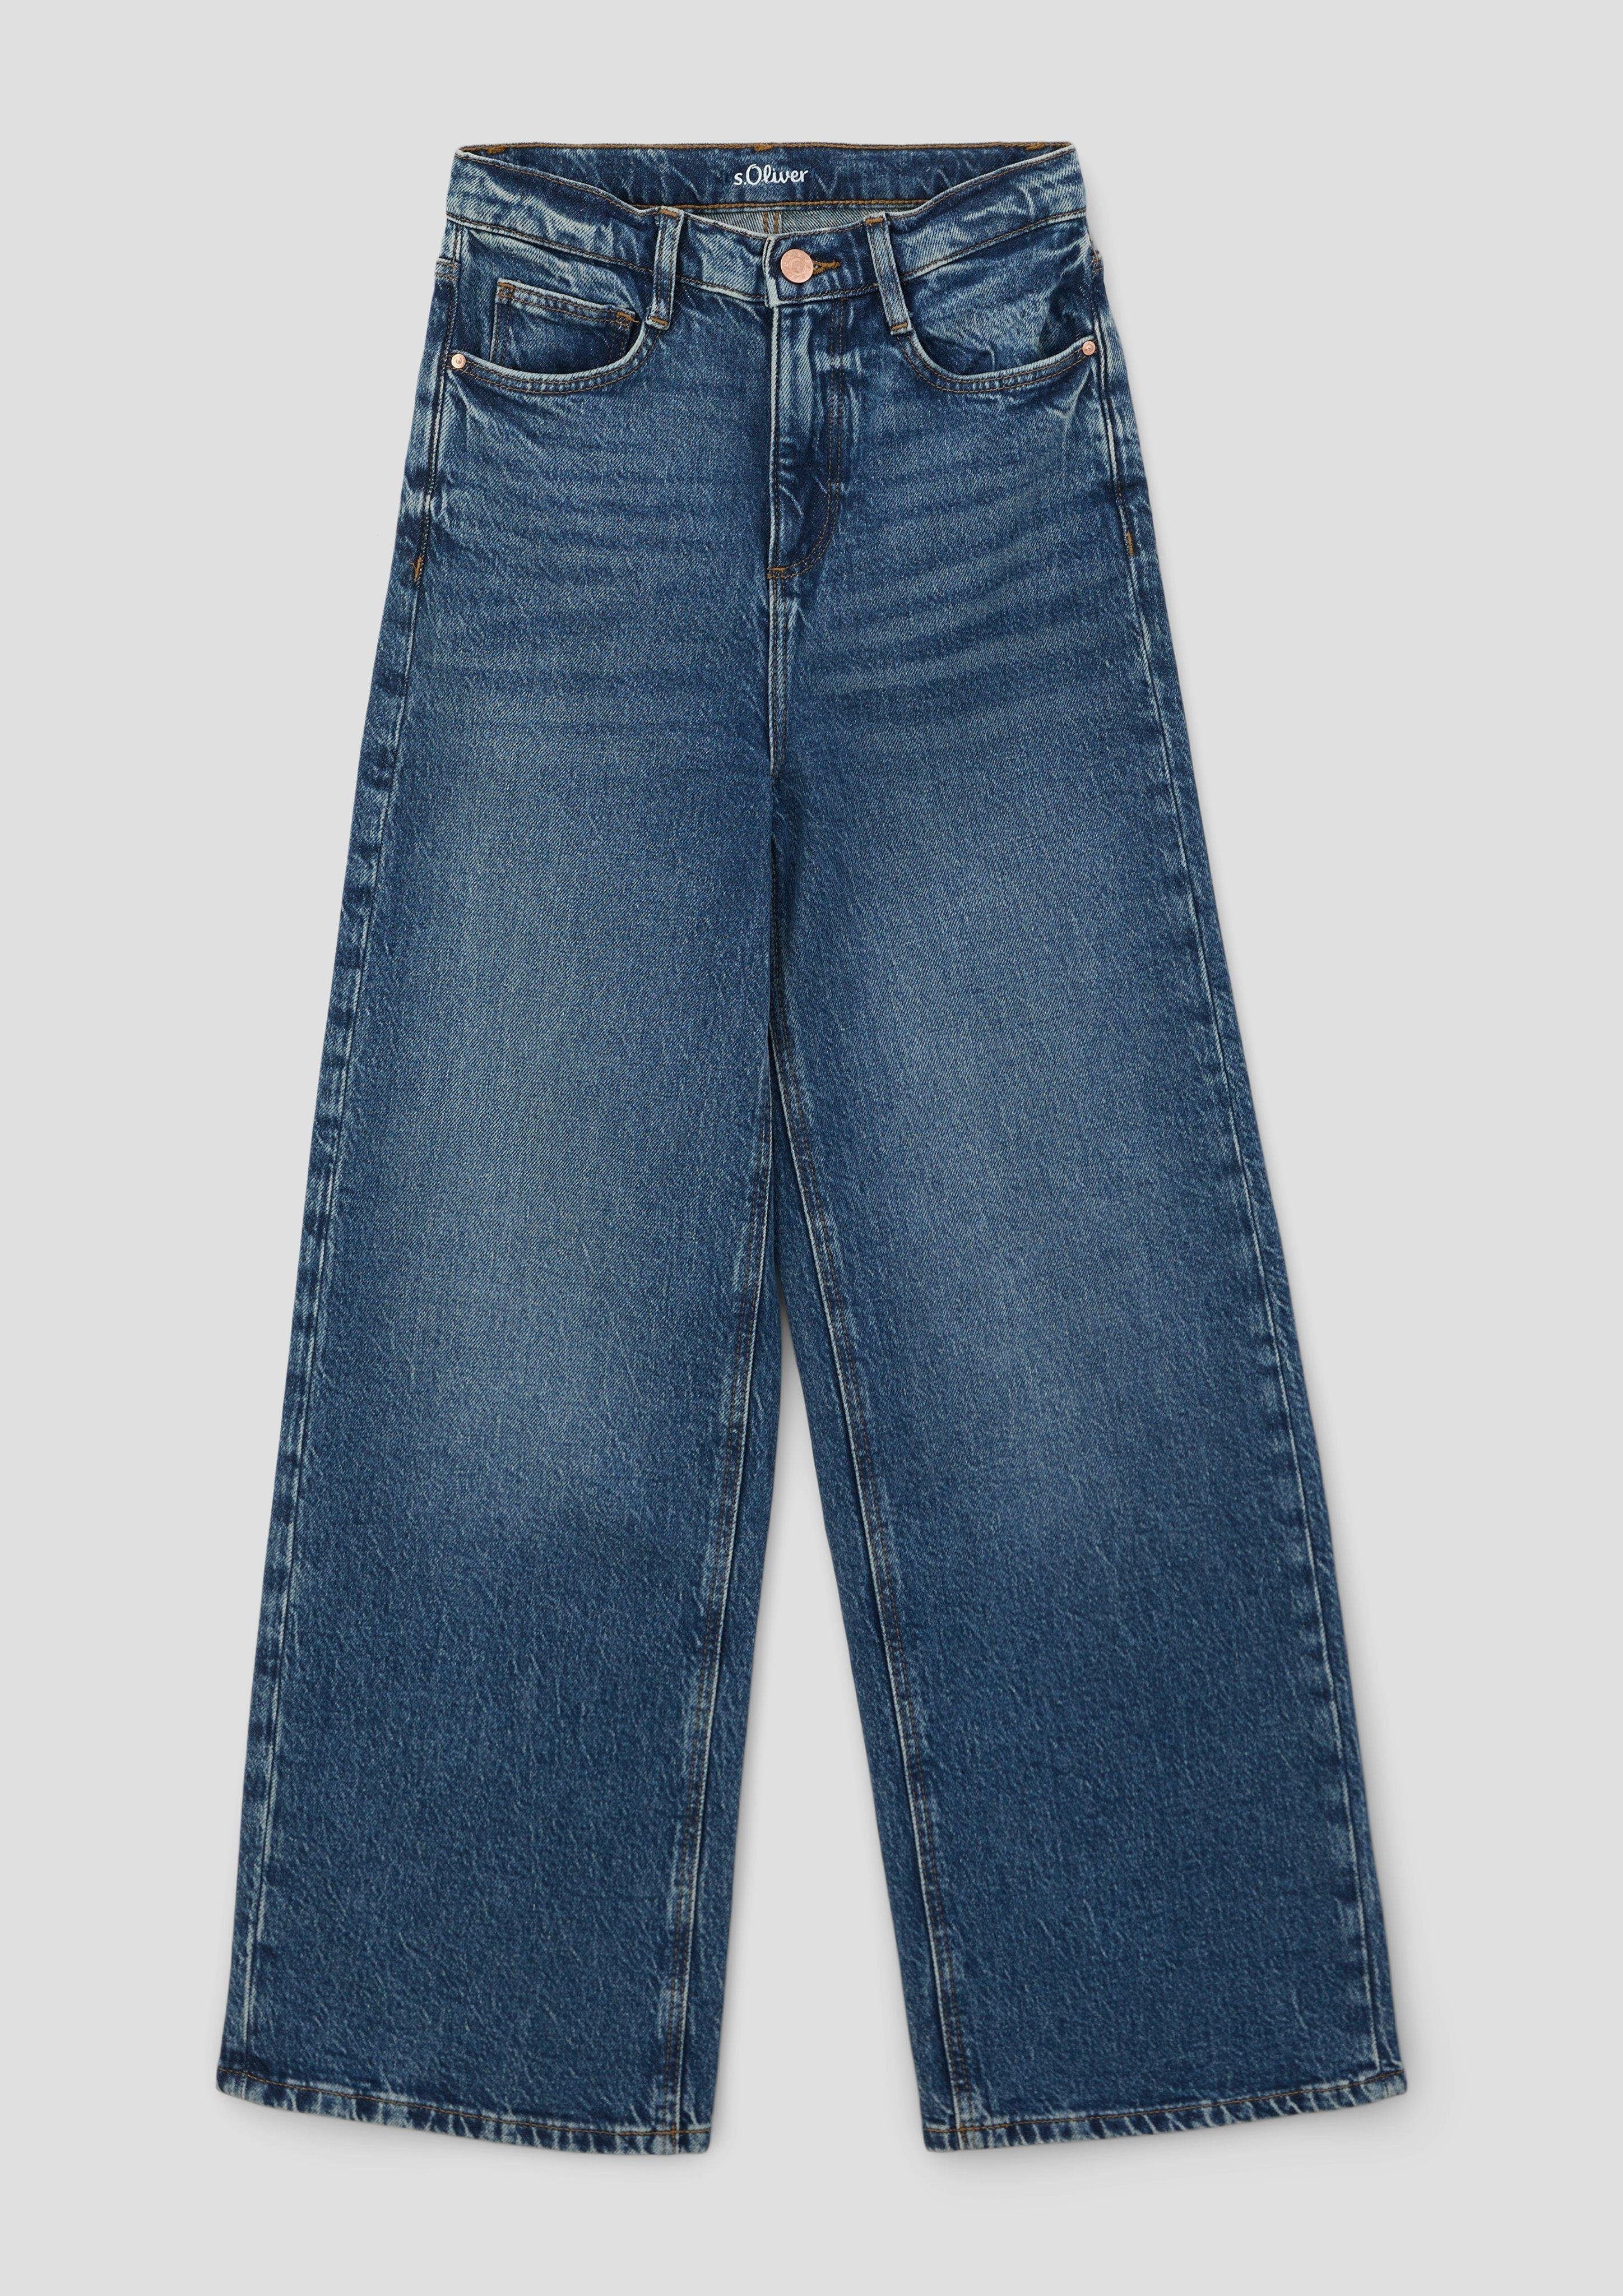 s.Oliver Stoffhose Jeans / Regular Fit / Super High Rise / Wide Leg Waschung | Stoffhosen